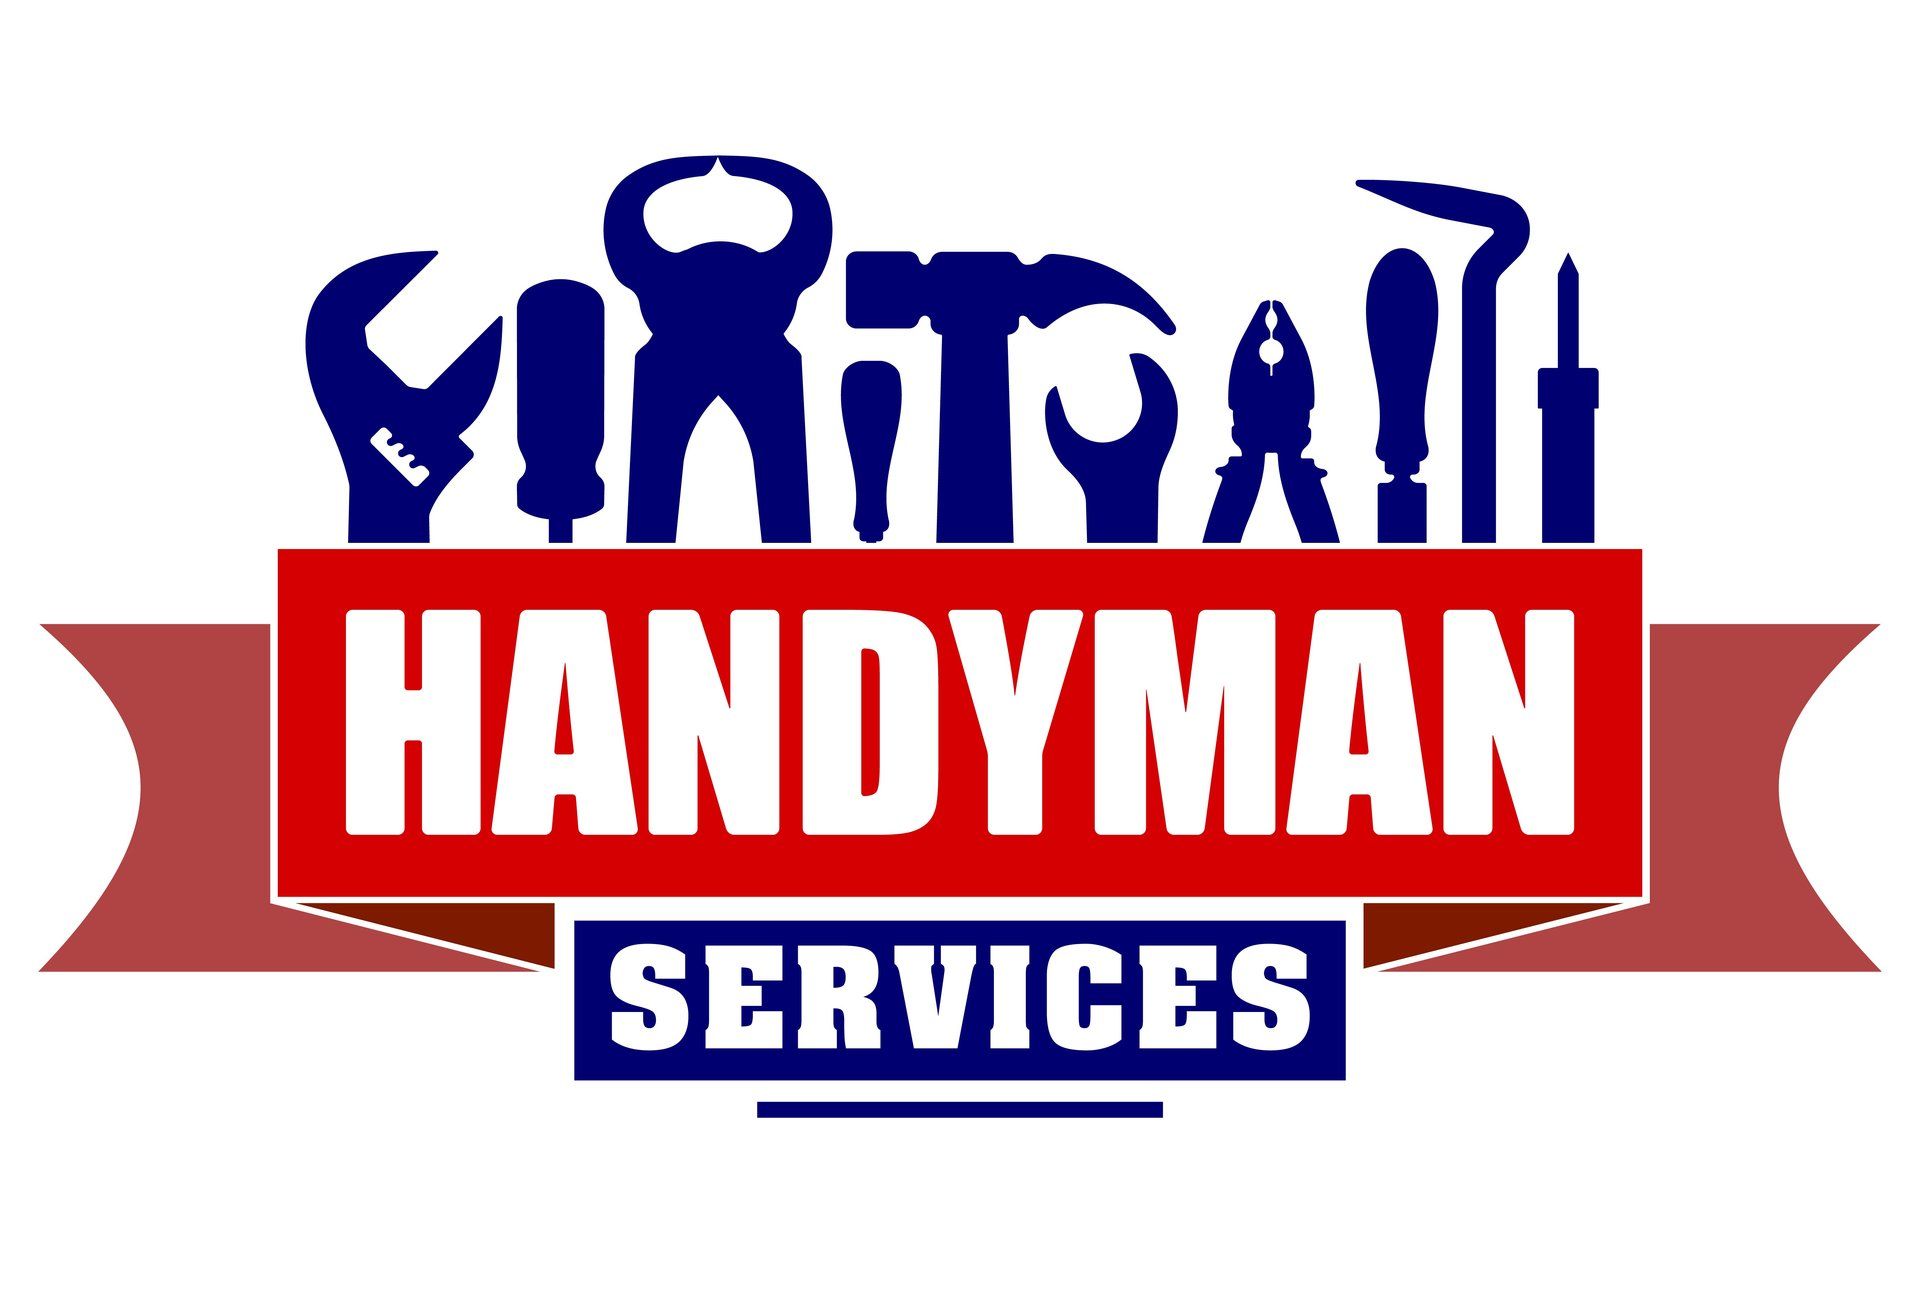 How To Write A Proposal For Handyman Services - Route